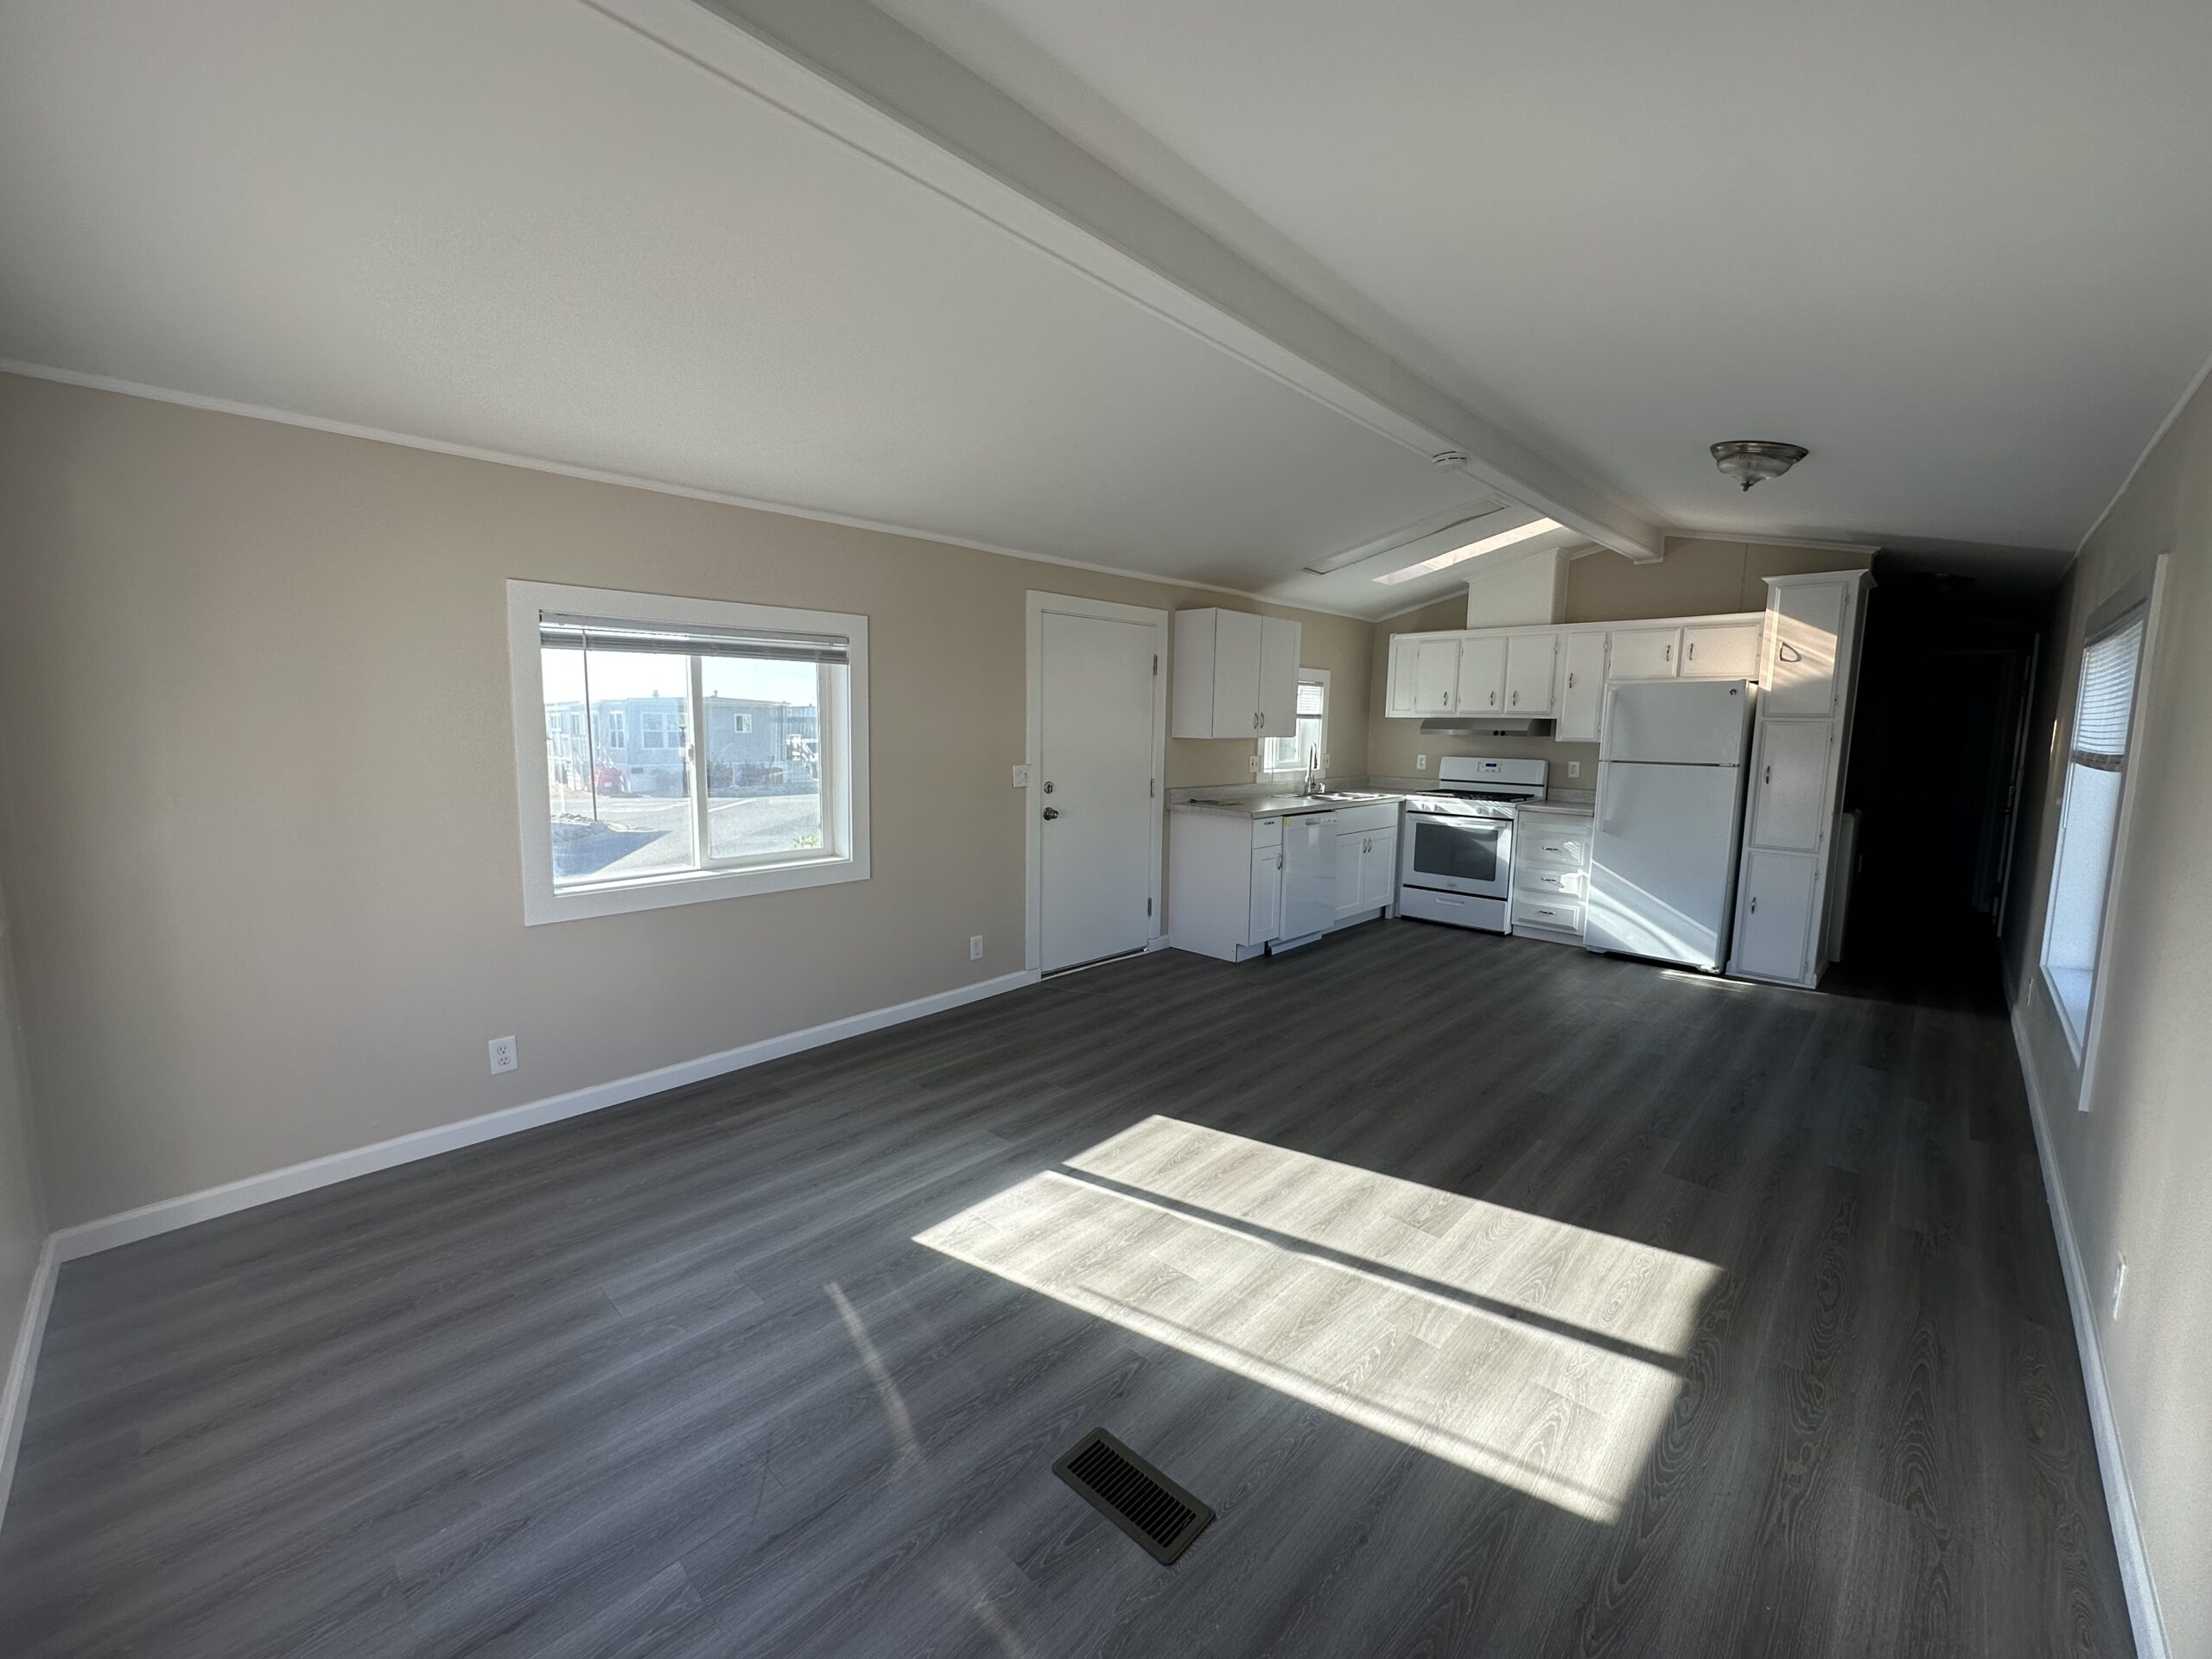 Sunlit open-plan living space with kitchen, featuring white appliances and dark wood flooring.